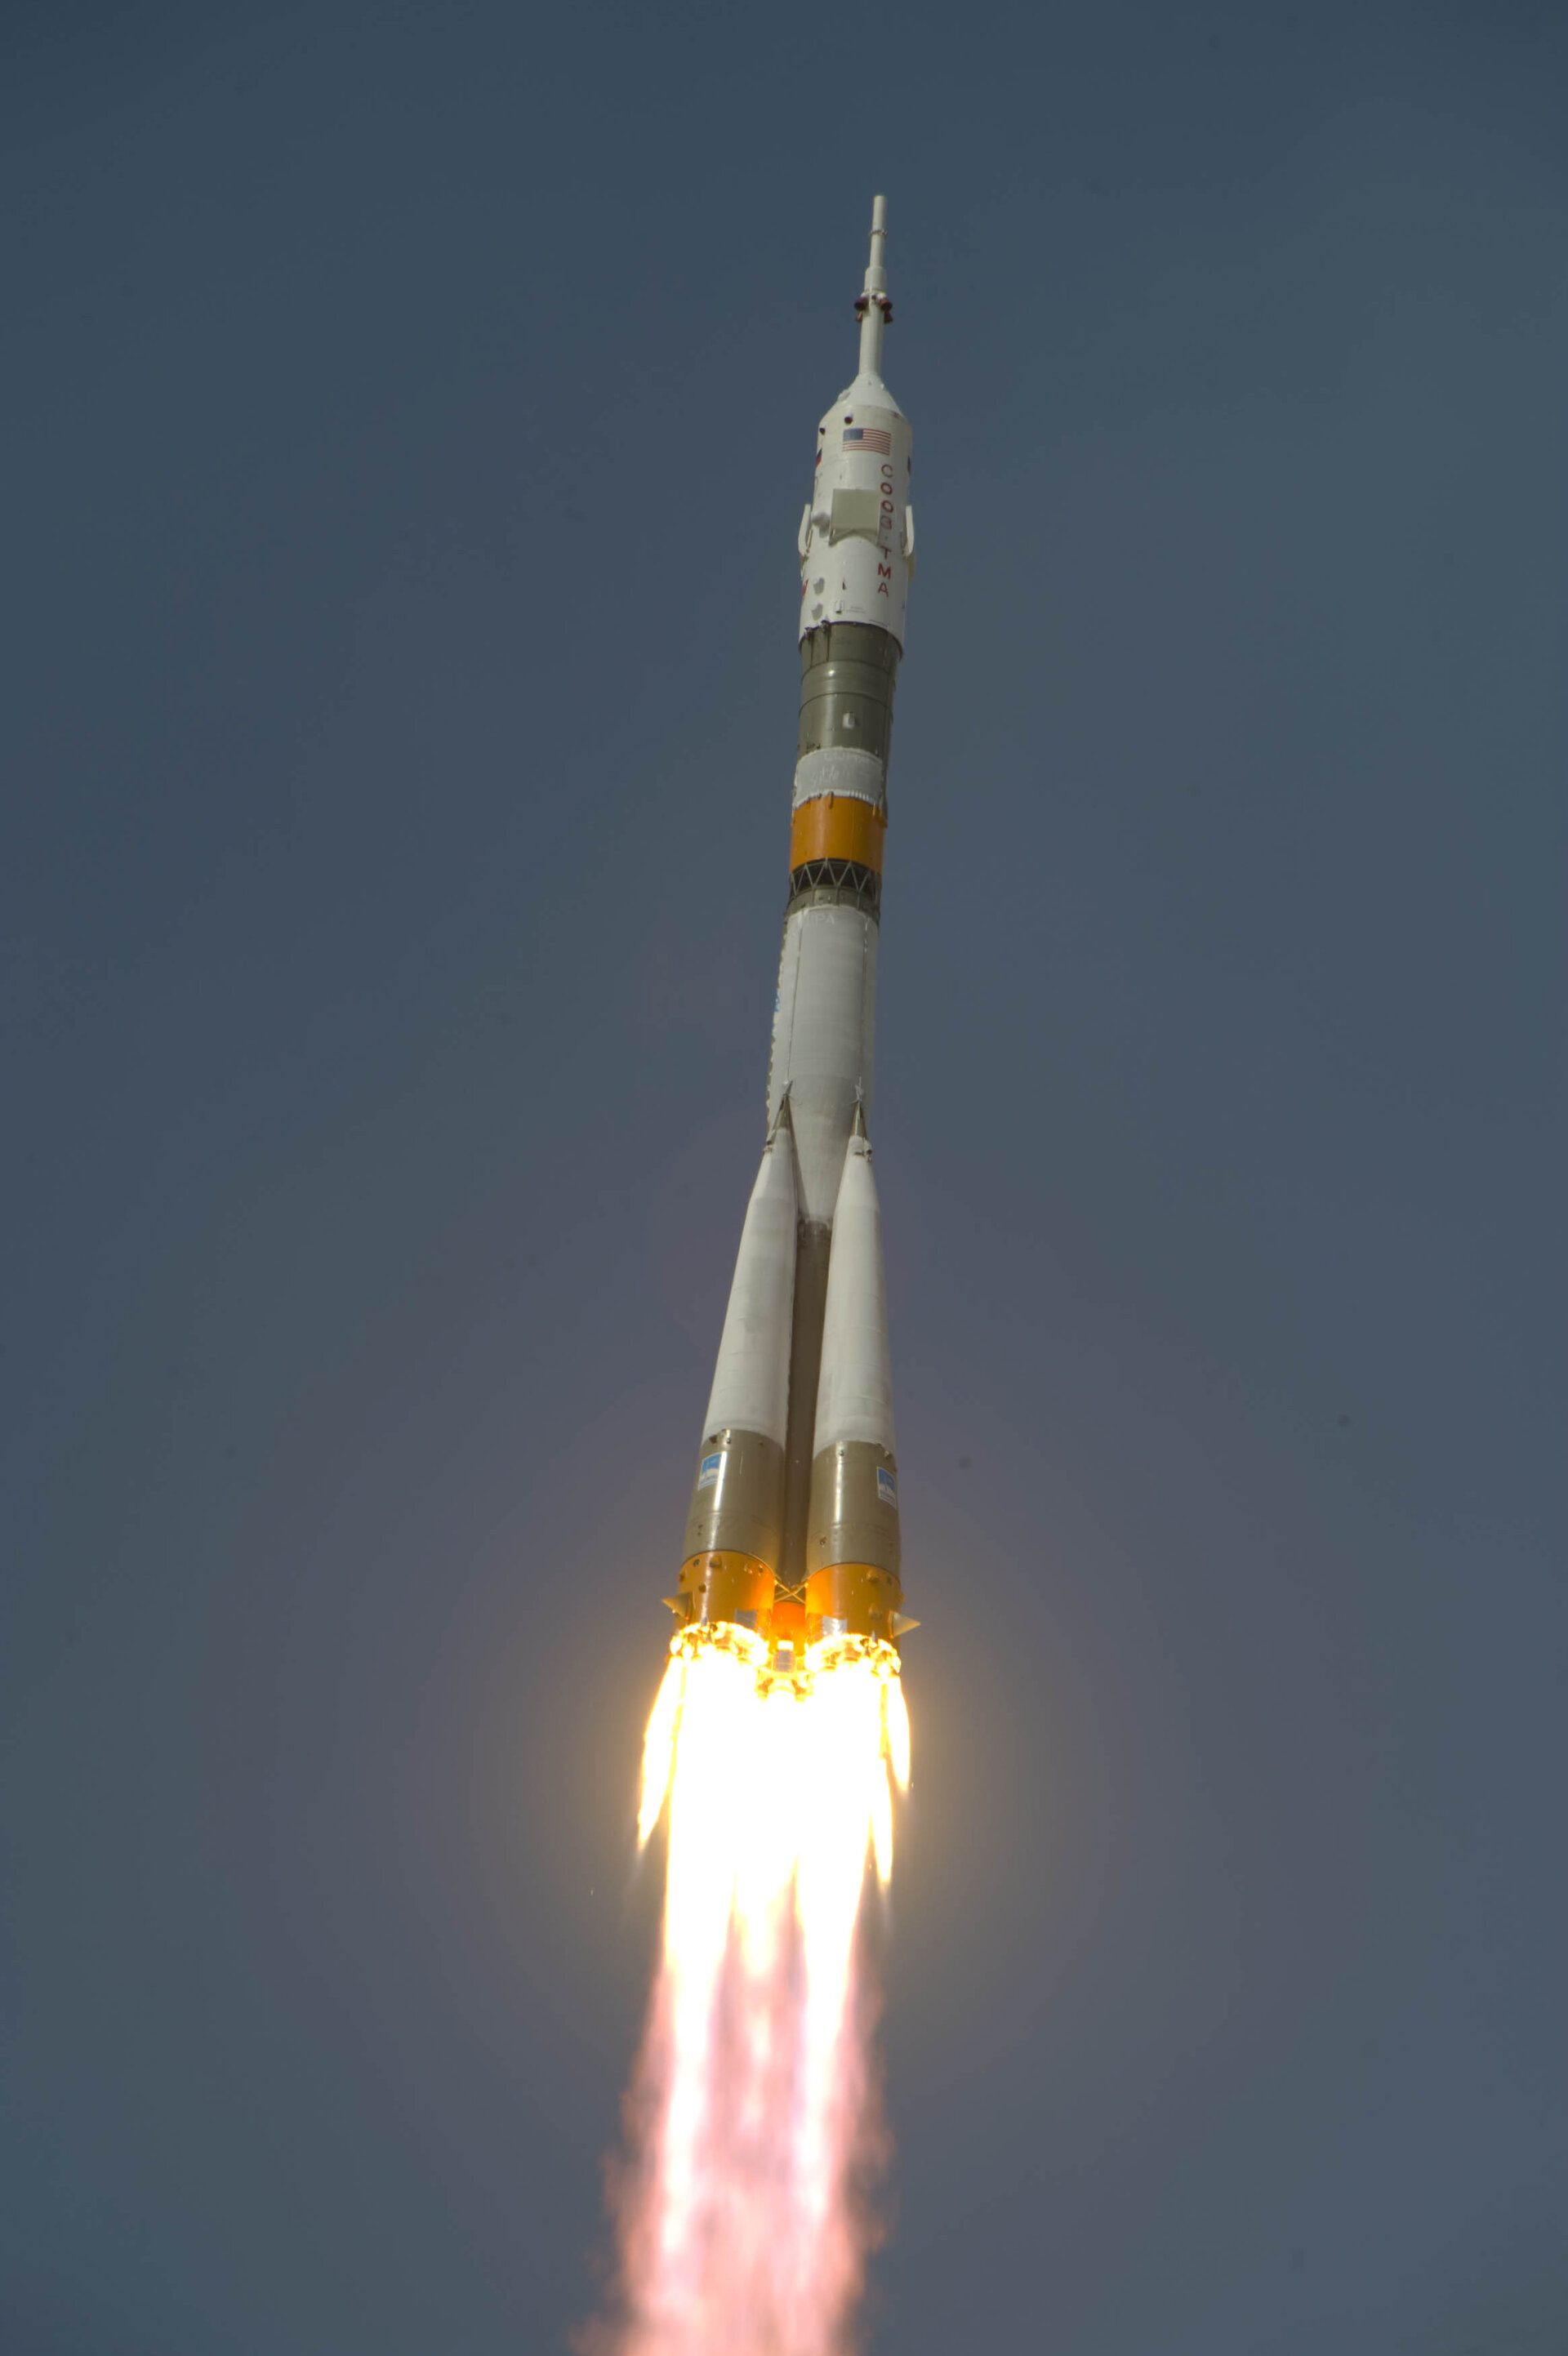 The Soyuz TMA-15 launches from the Baikonur Cosmodrome in Kazakhstan at 12:34 CEST on 27 May 2009